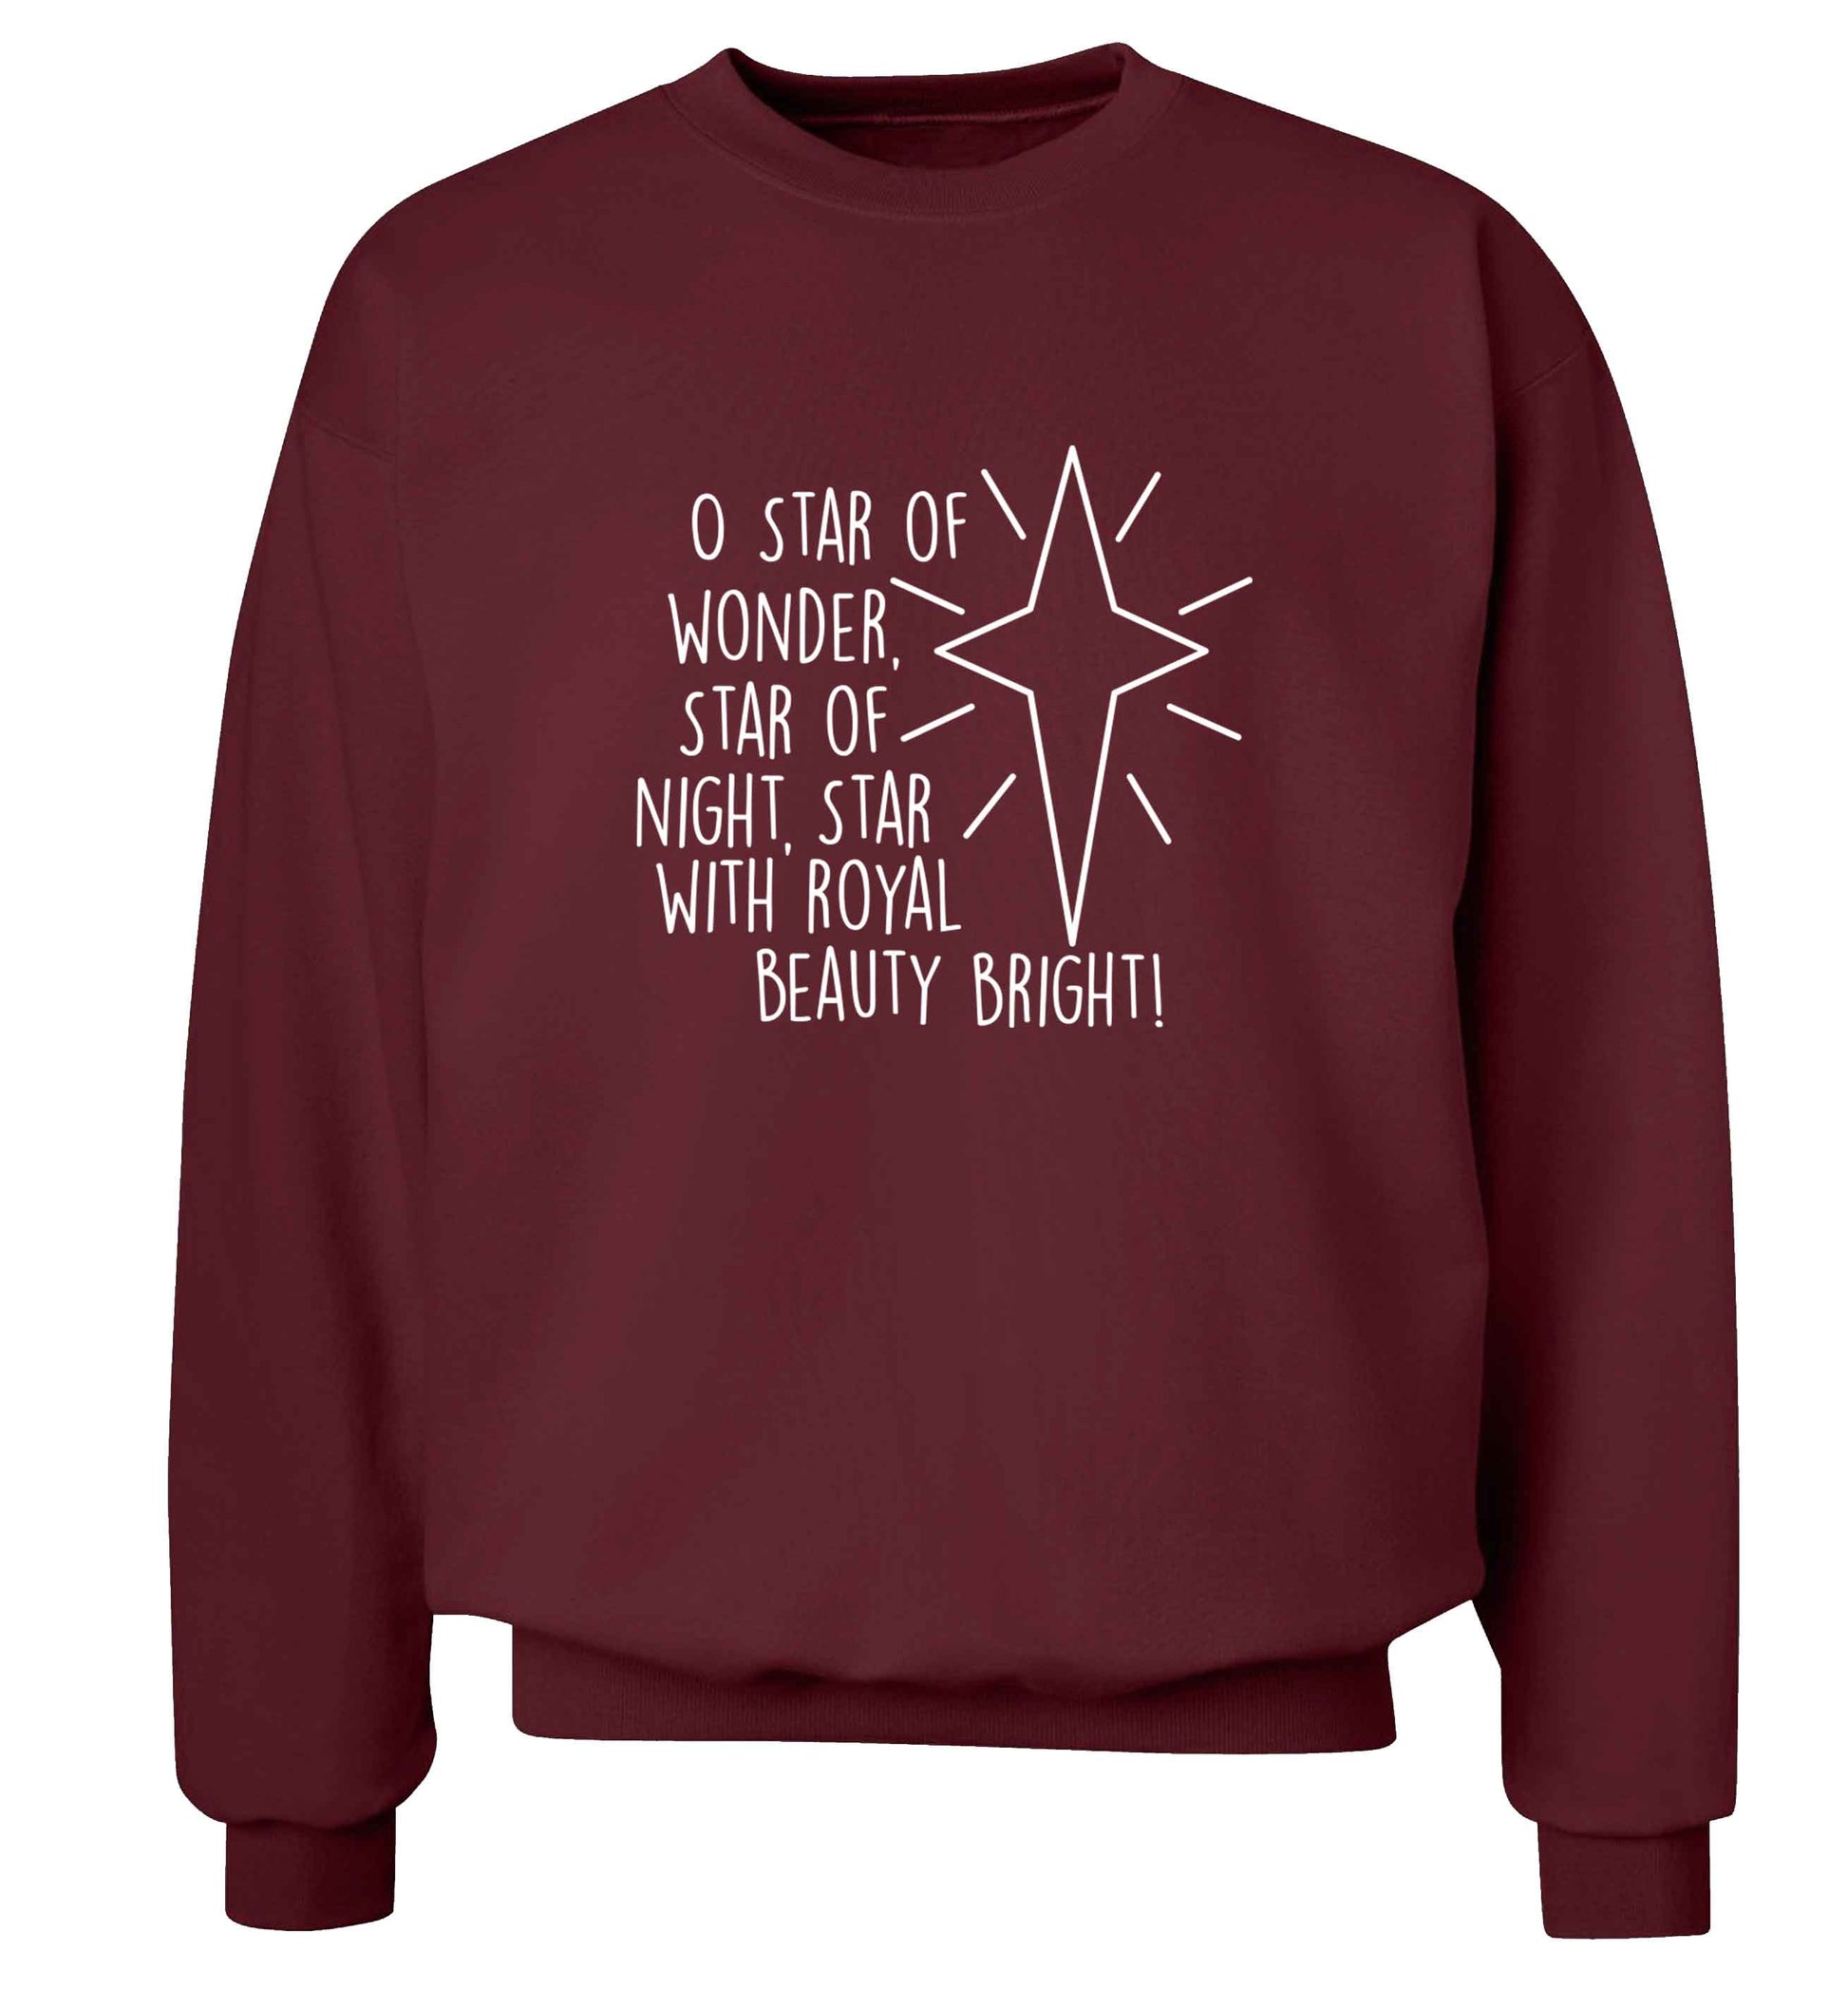 Oh star of wonder star of night, star with royal beauty bright adult's unisex maroon sweater 2XL